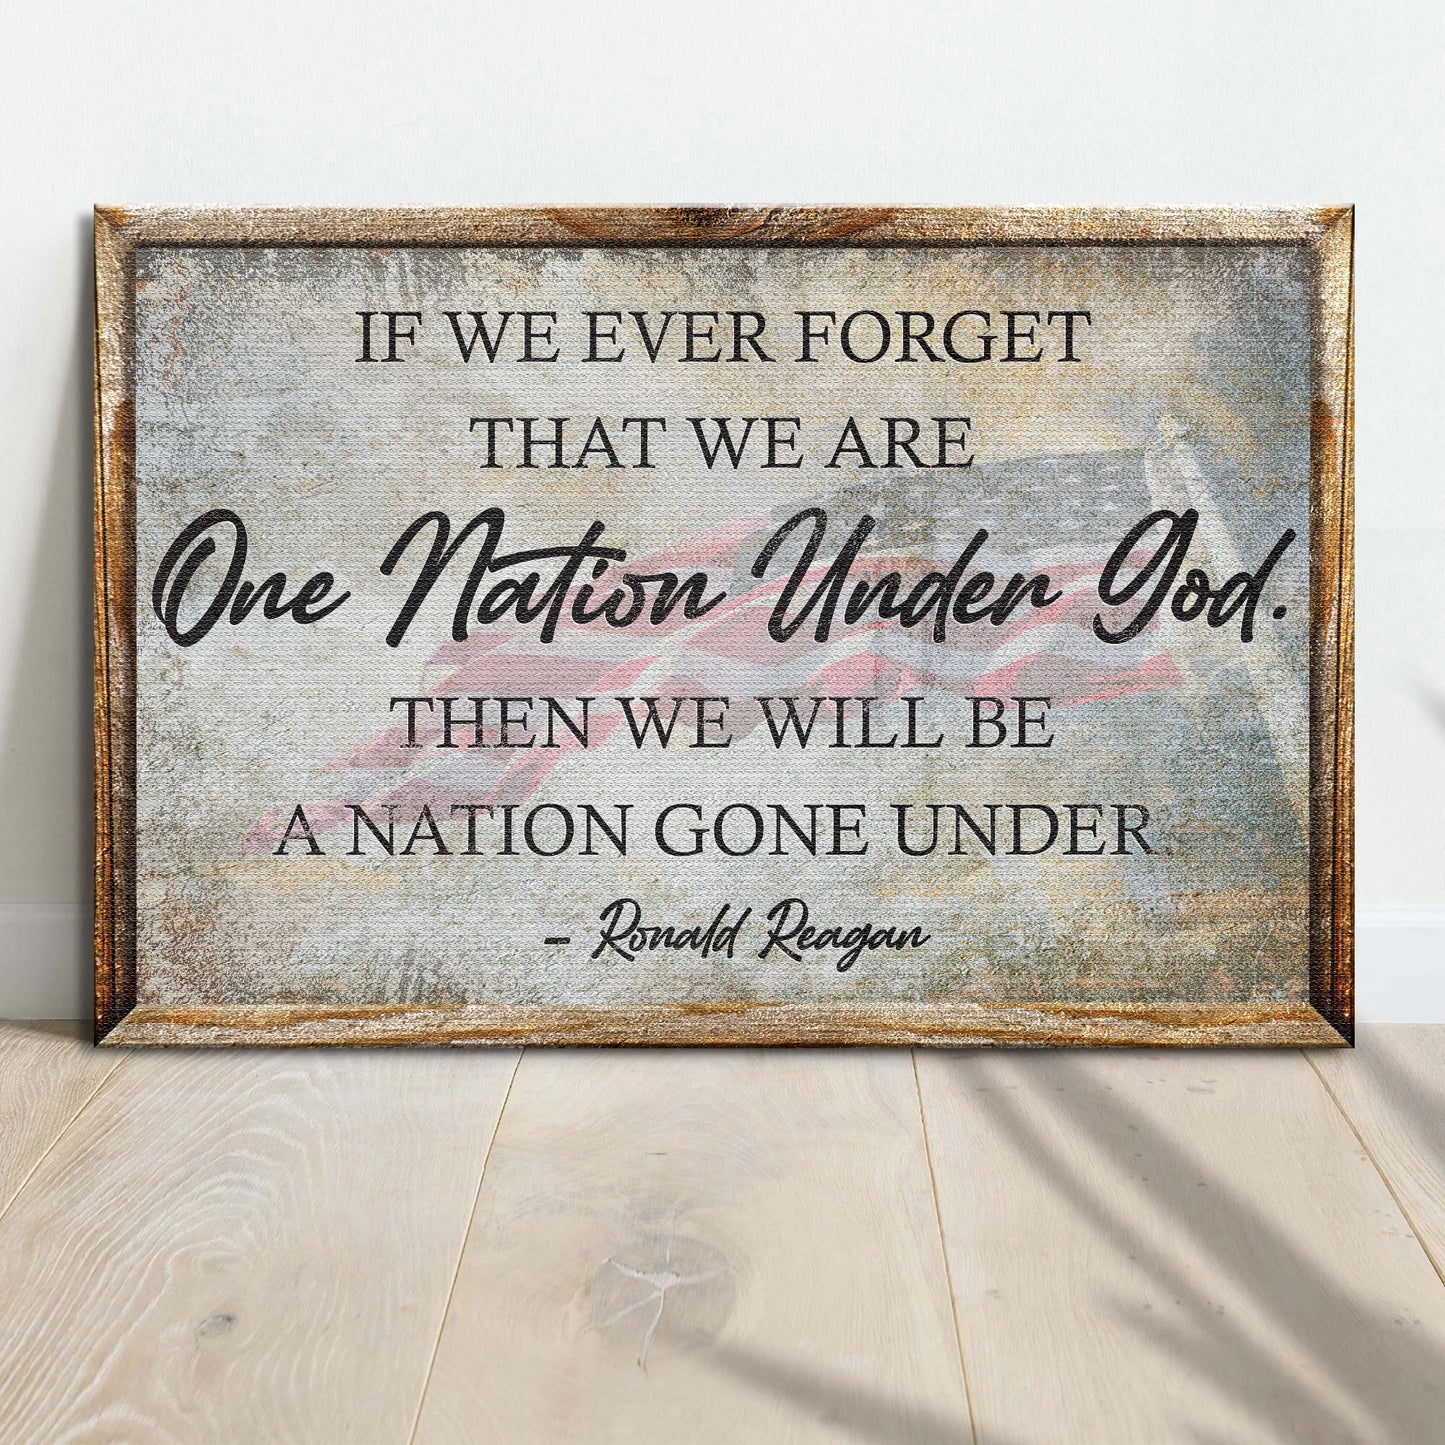 One Nation Under God Ronald Reagan Sign III - Image by Tailored Canvases